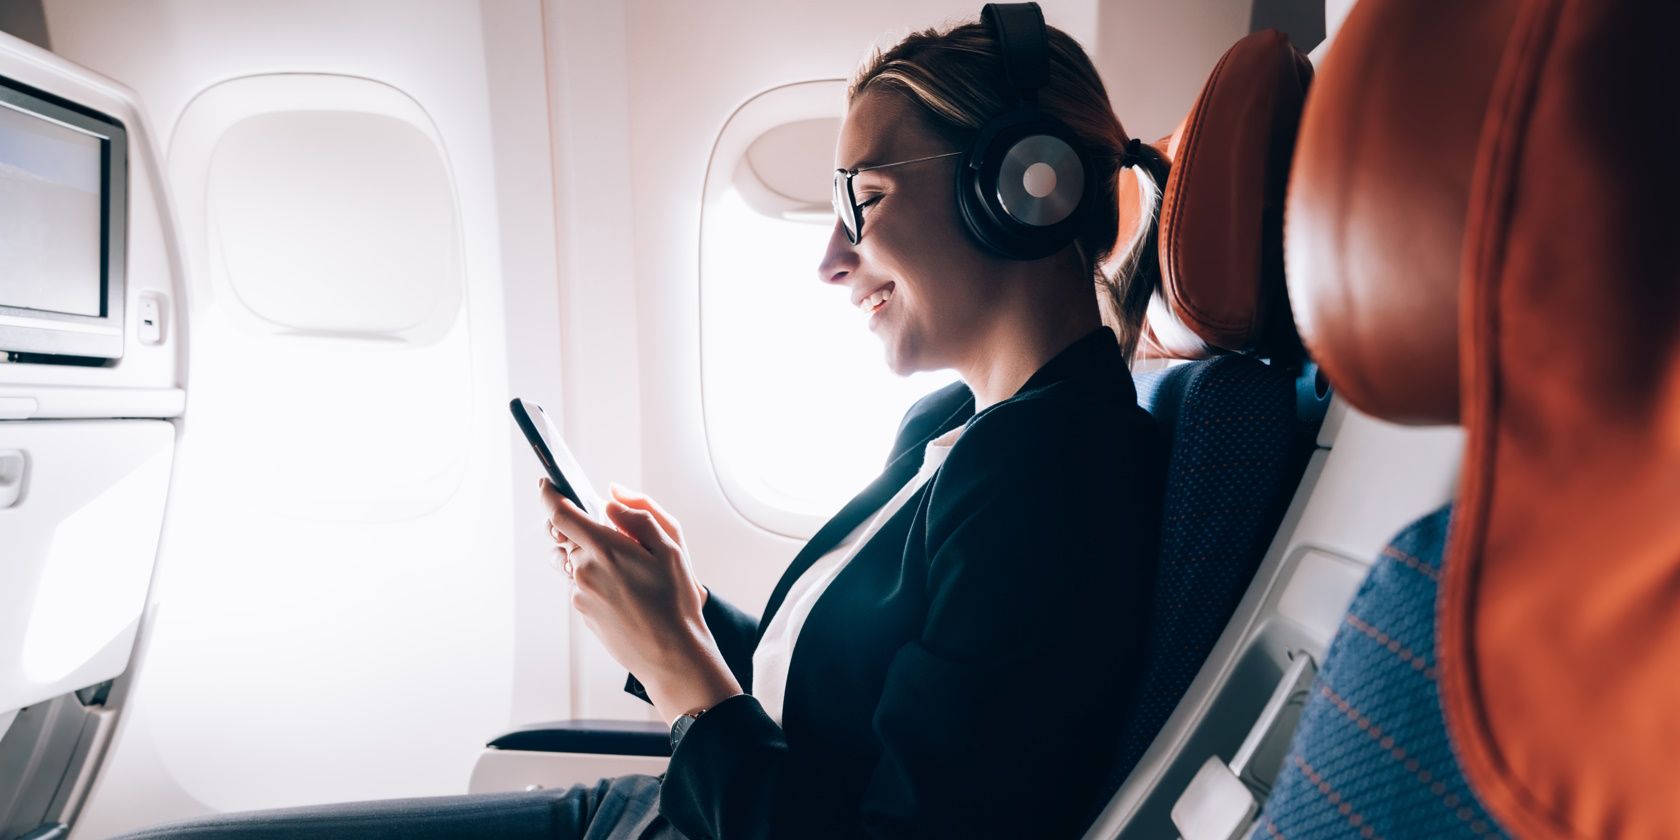 photo of a woman listening to music on a plane